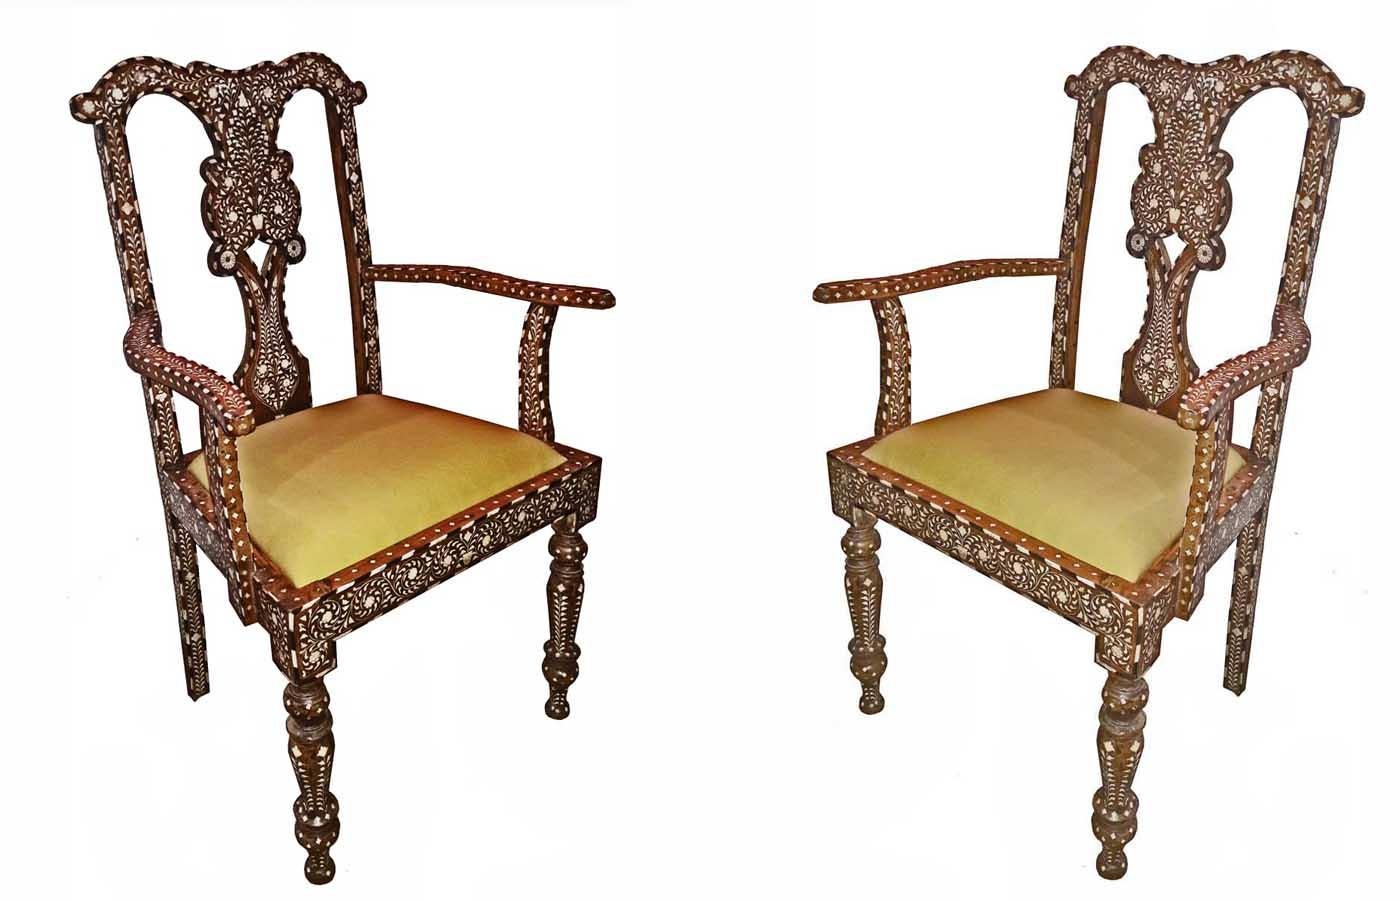 Anglo-Indian Bone-Inlaid Armchair from India, Mid-20th Century